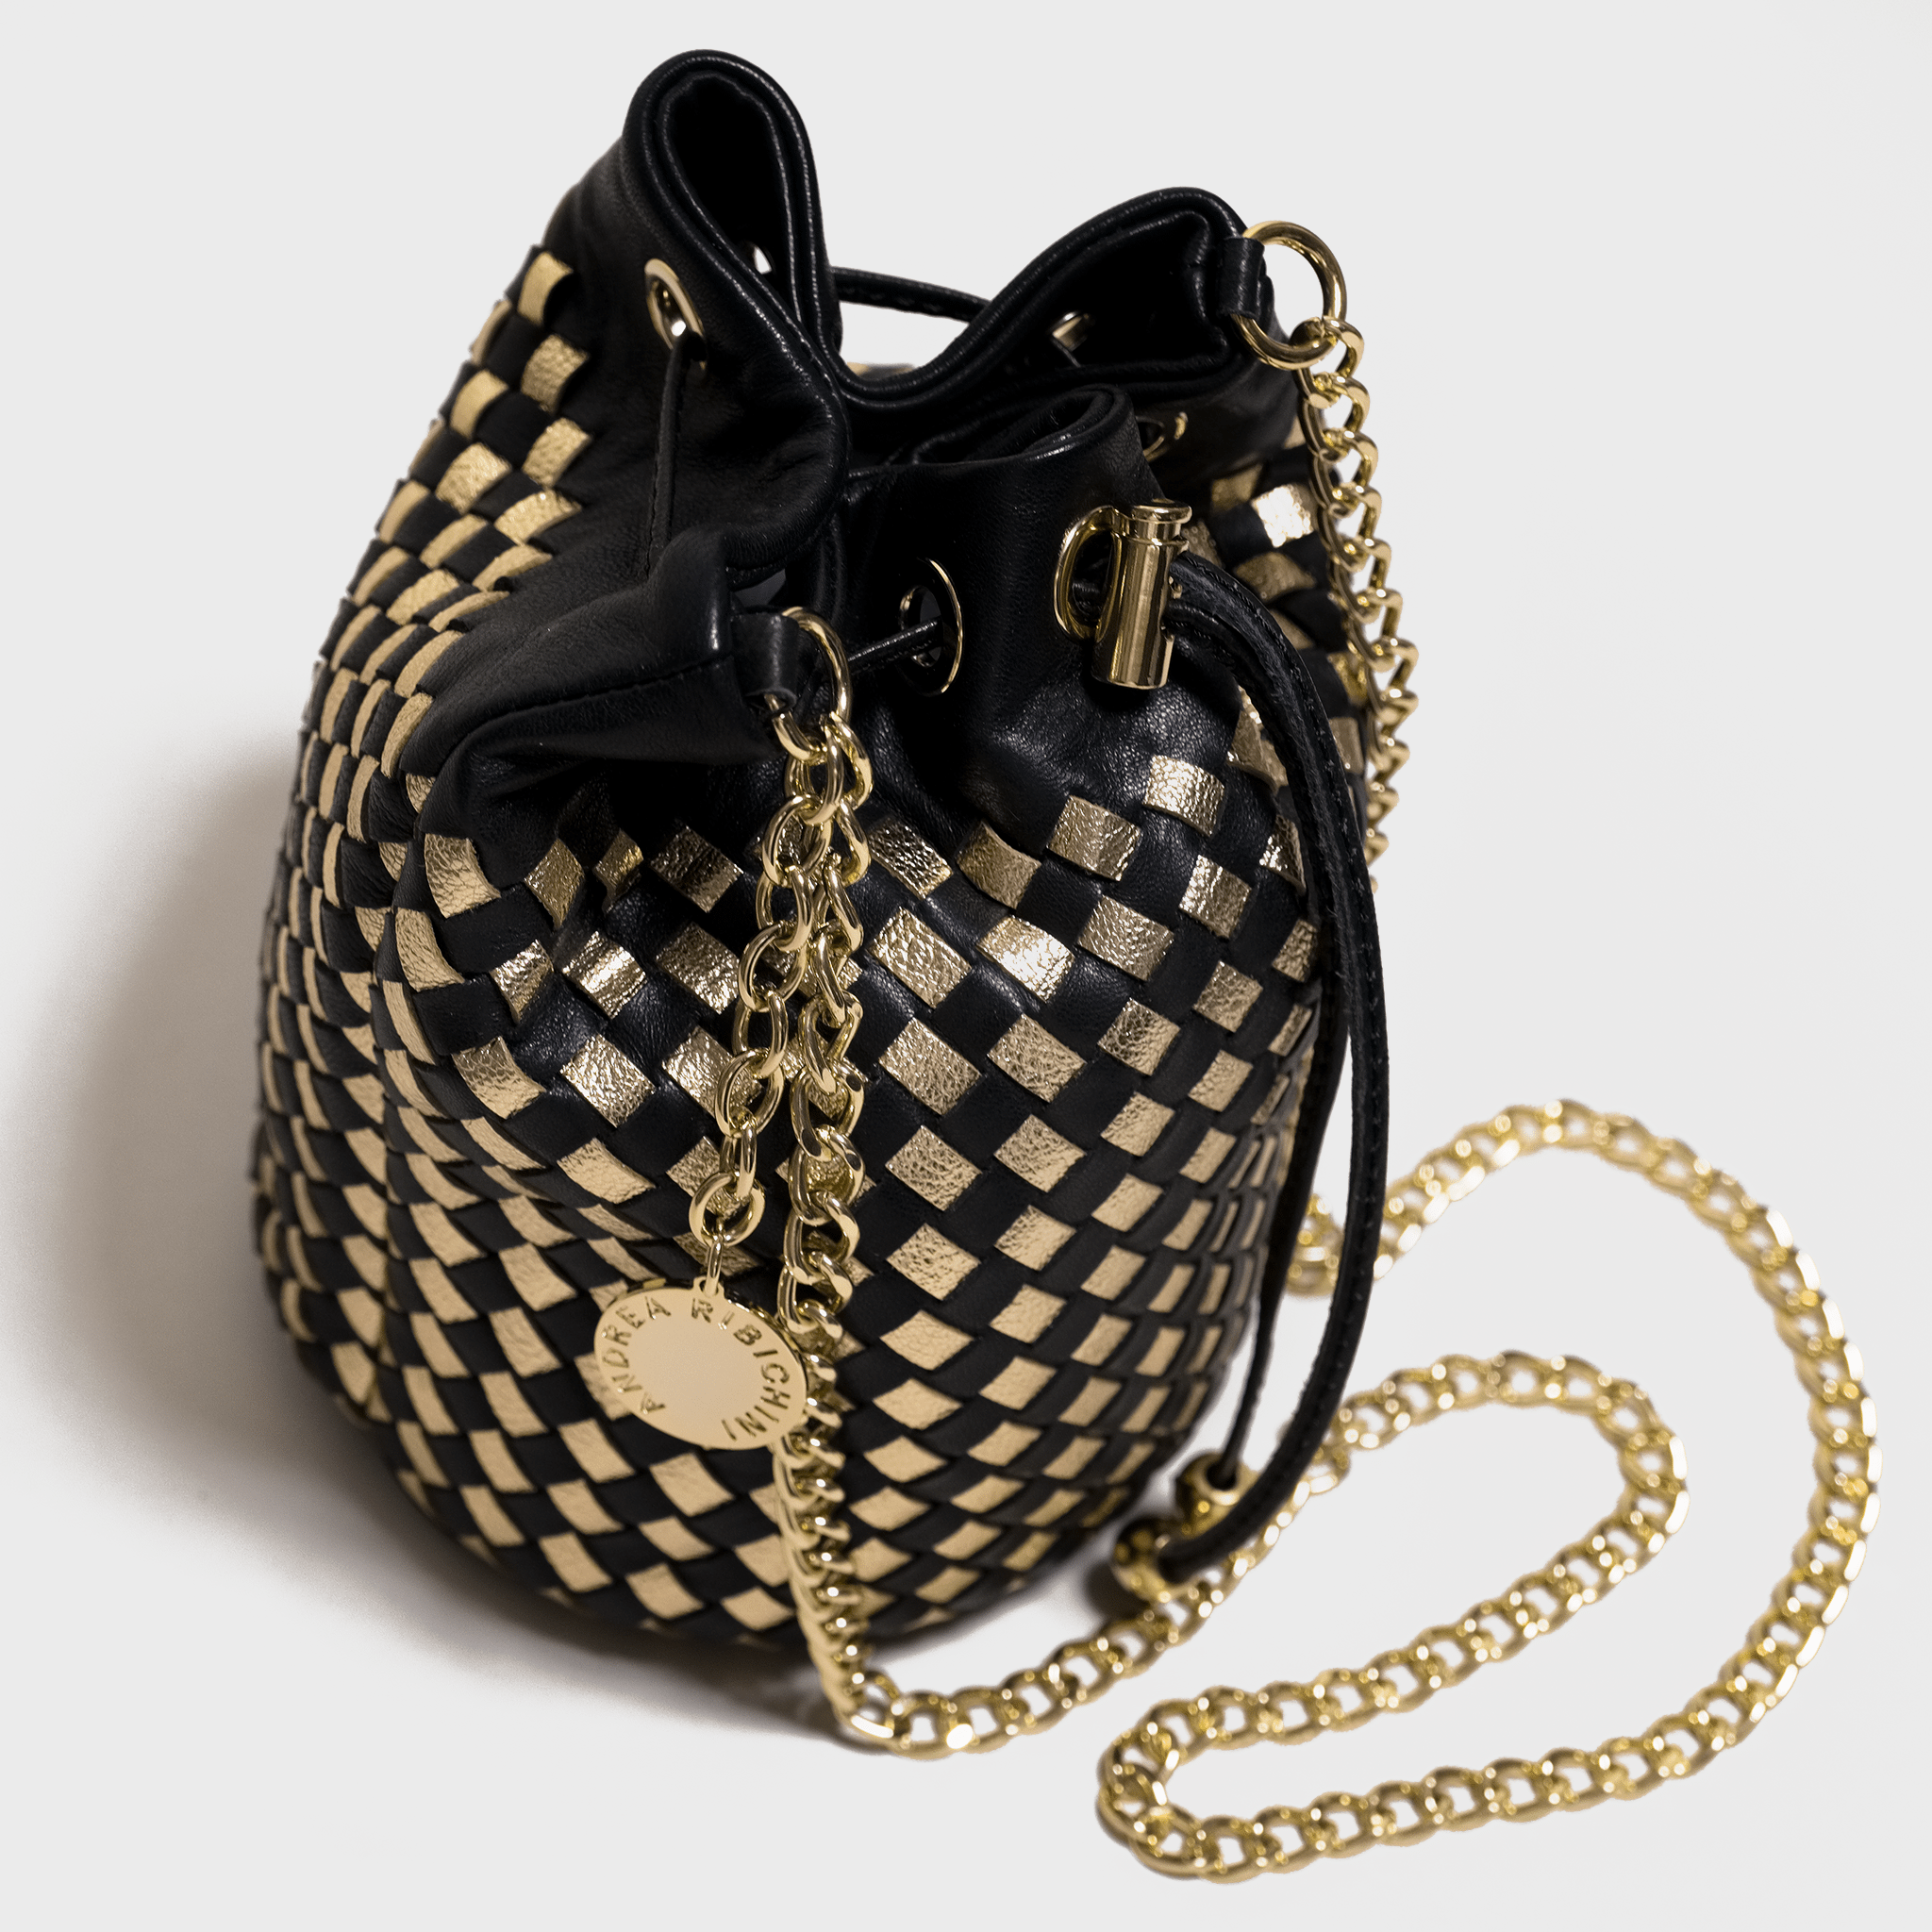 Black woven leather bag Bucket bag with chain shoulder. Handmade in Italy